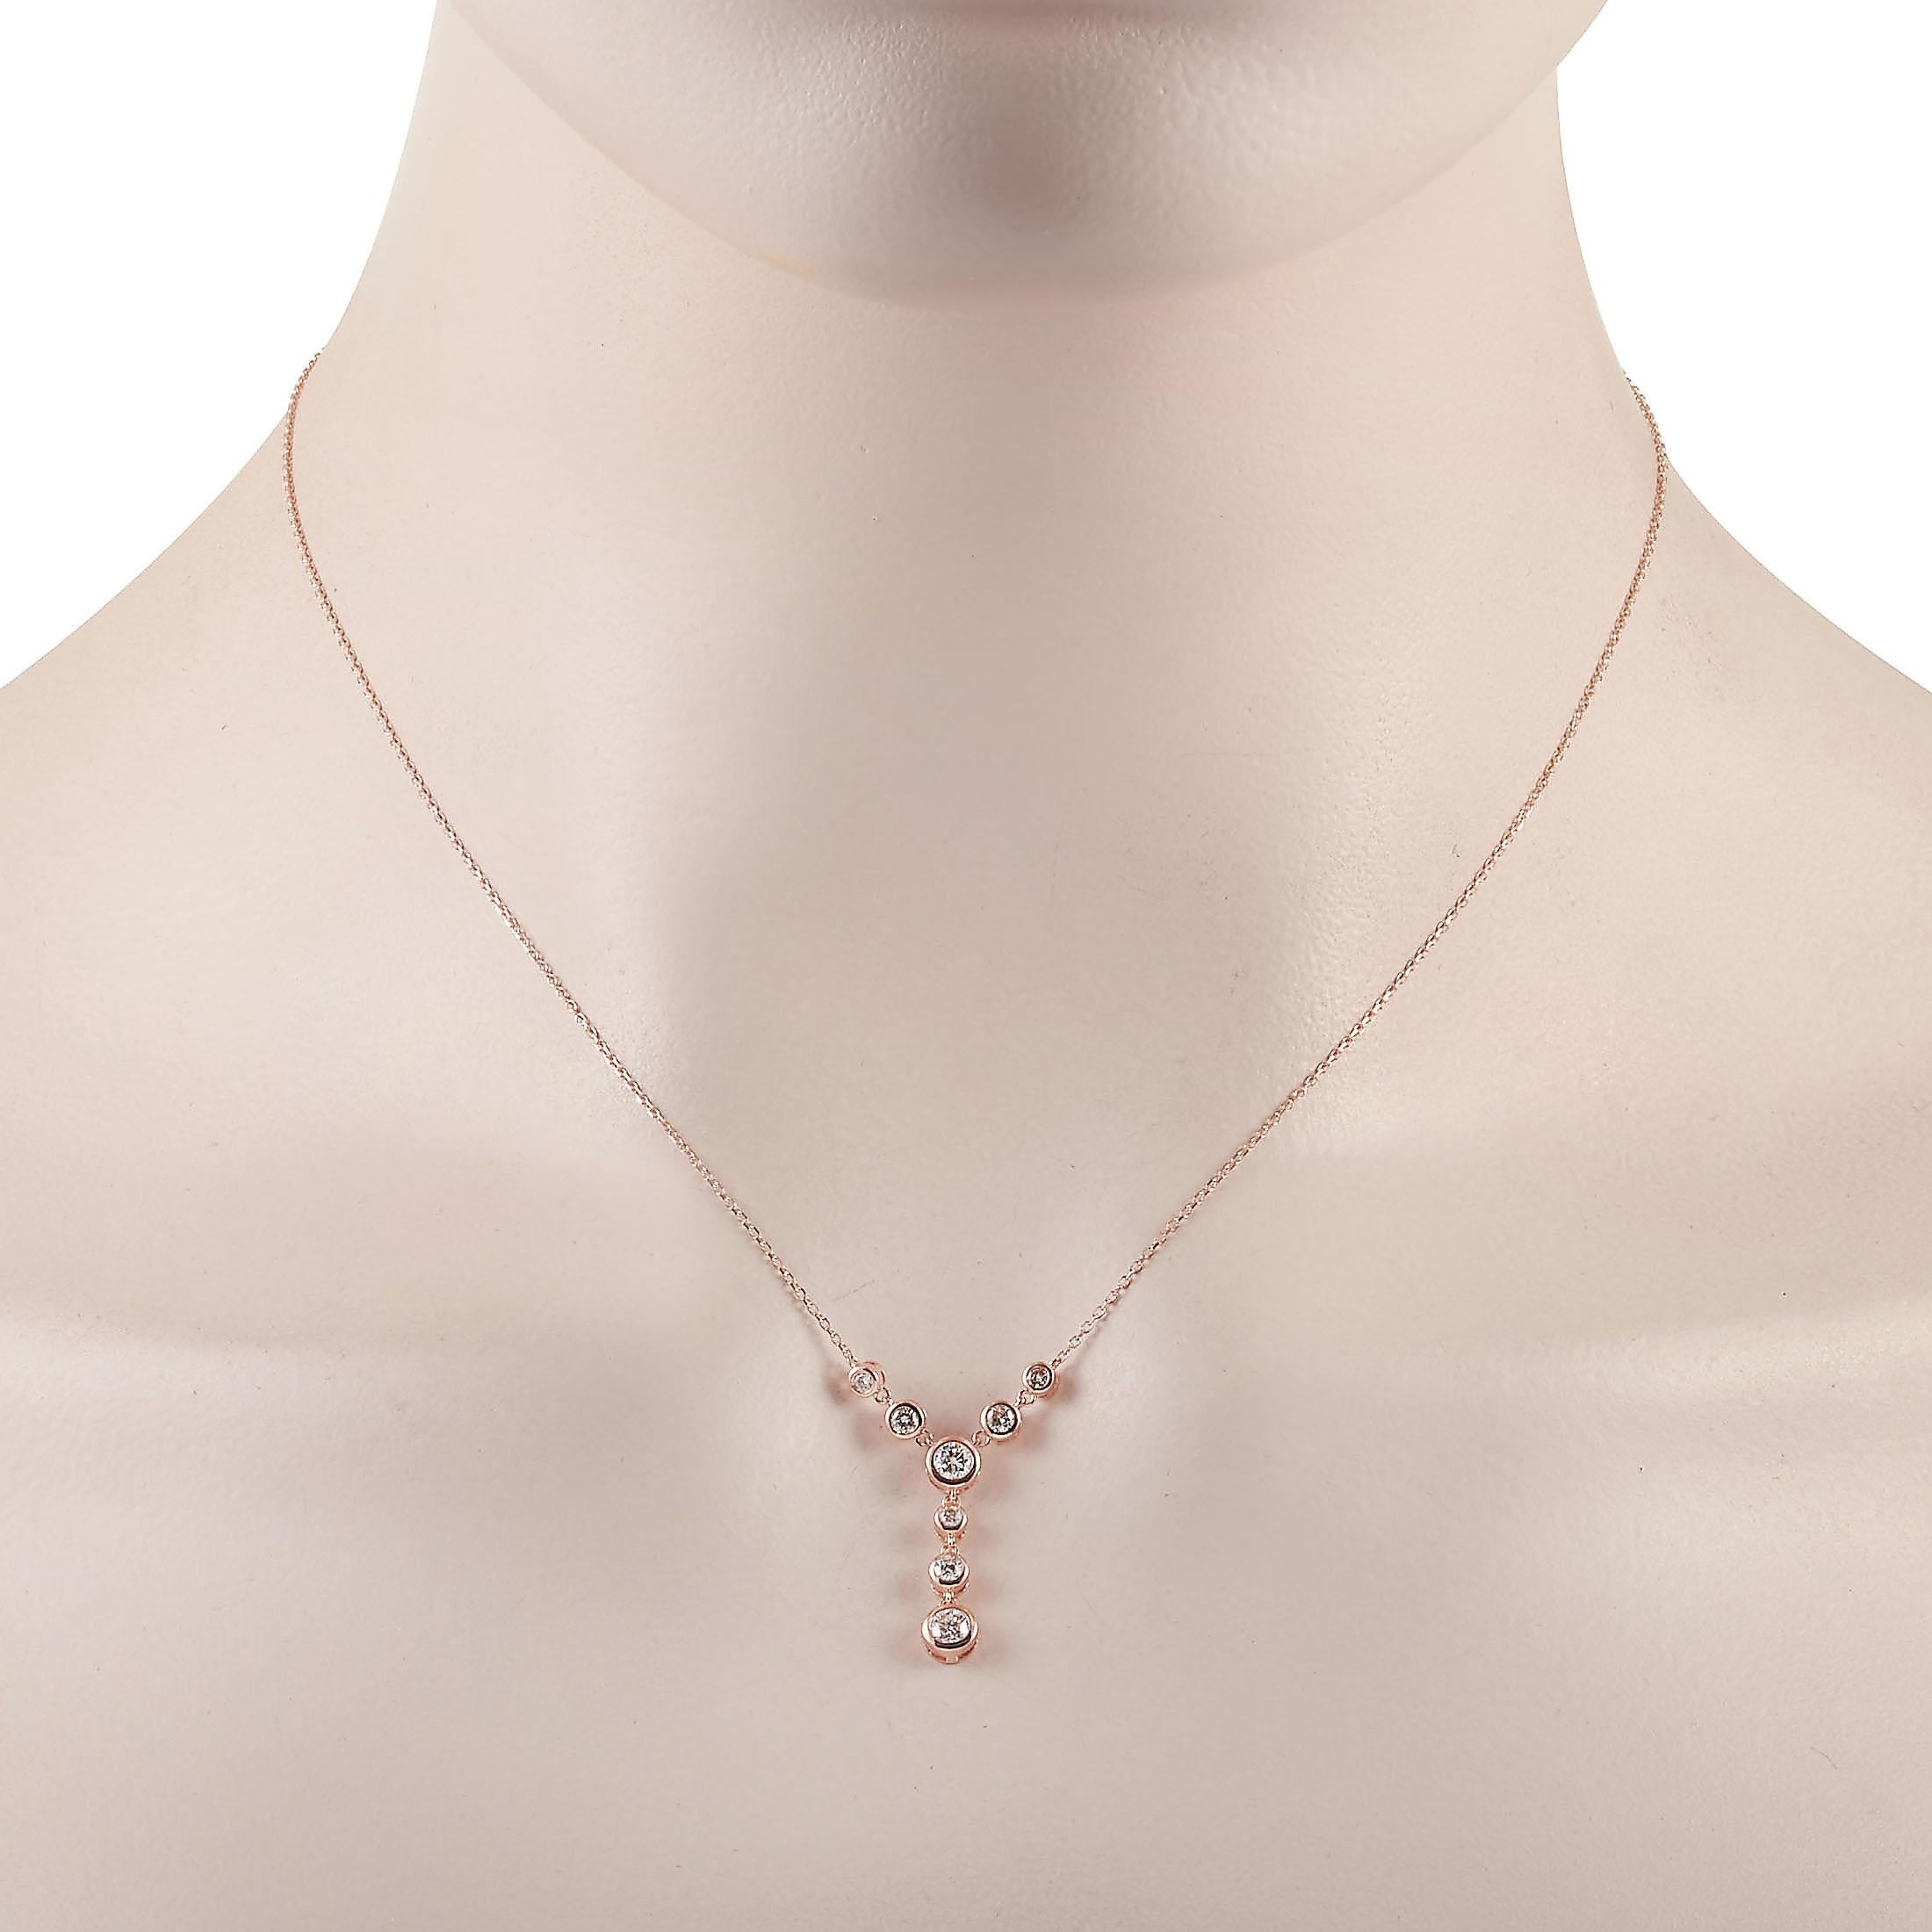 This LB Exclusive necklace is crafted from 14K rose gold and weighs 2.7 grams. It is presented with a 15” chain and boasts a pendant that measures 1” in length and 0.50” in width. The necklace is set with diamonds that total 0.50 carats.
 
 Offered